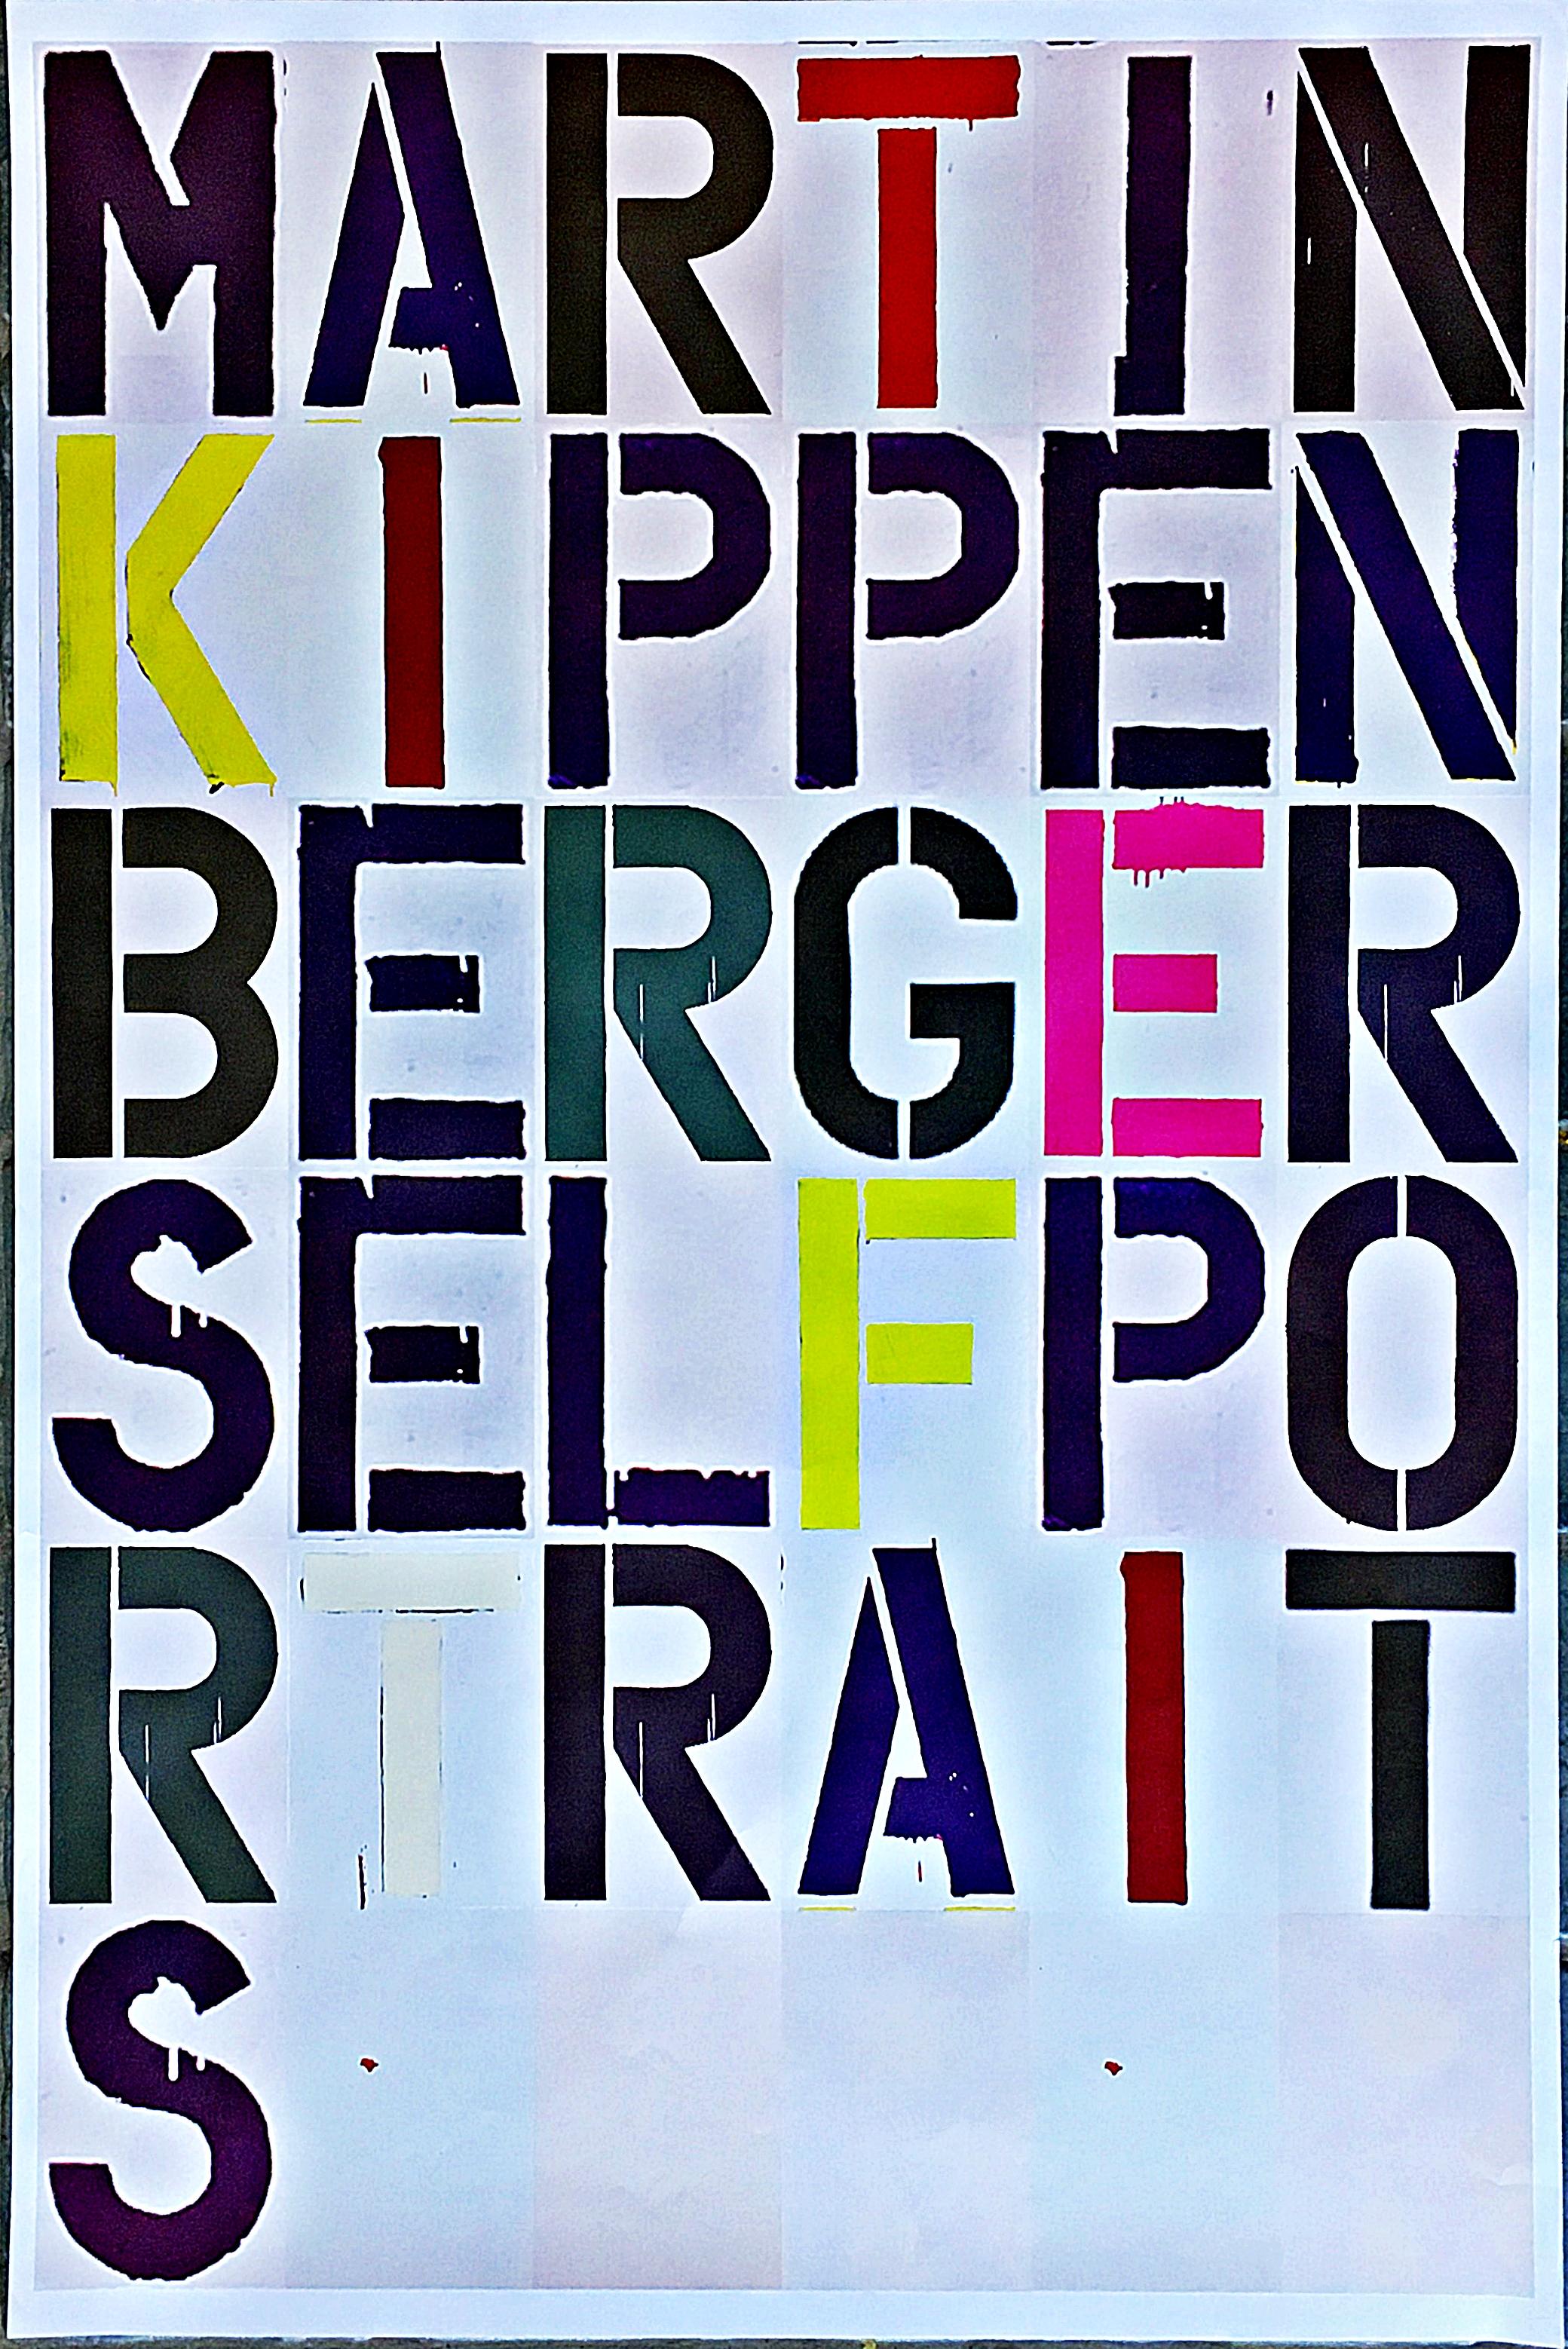 Christopher Wool
Martin Kippenberger Self-Portraits Poster, 2005
Offset lithographic poster in colours on smooth wove paper.
36 × 24 inches
Unframed

This poster designed by Christopher Wool was created on the occasion of the Martin Kippenberger